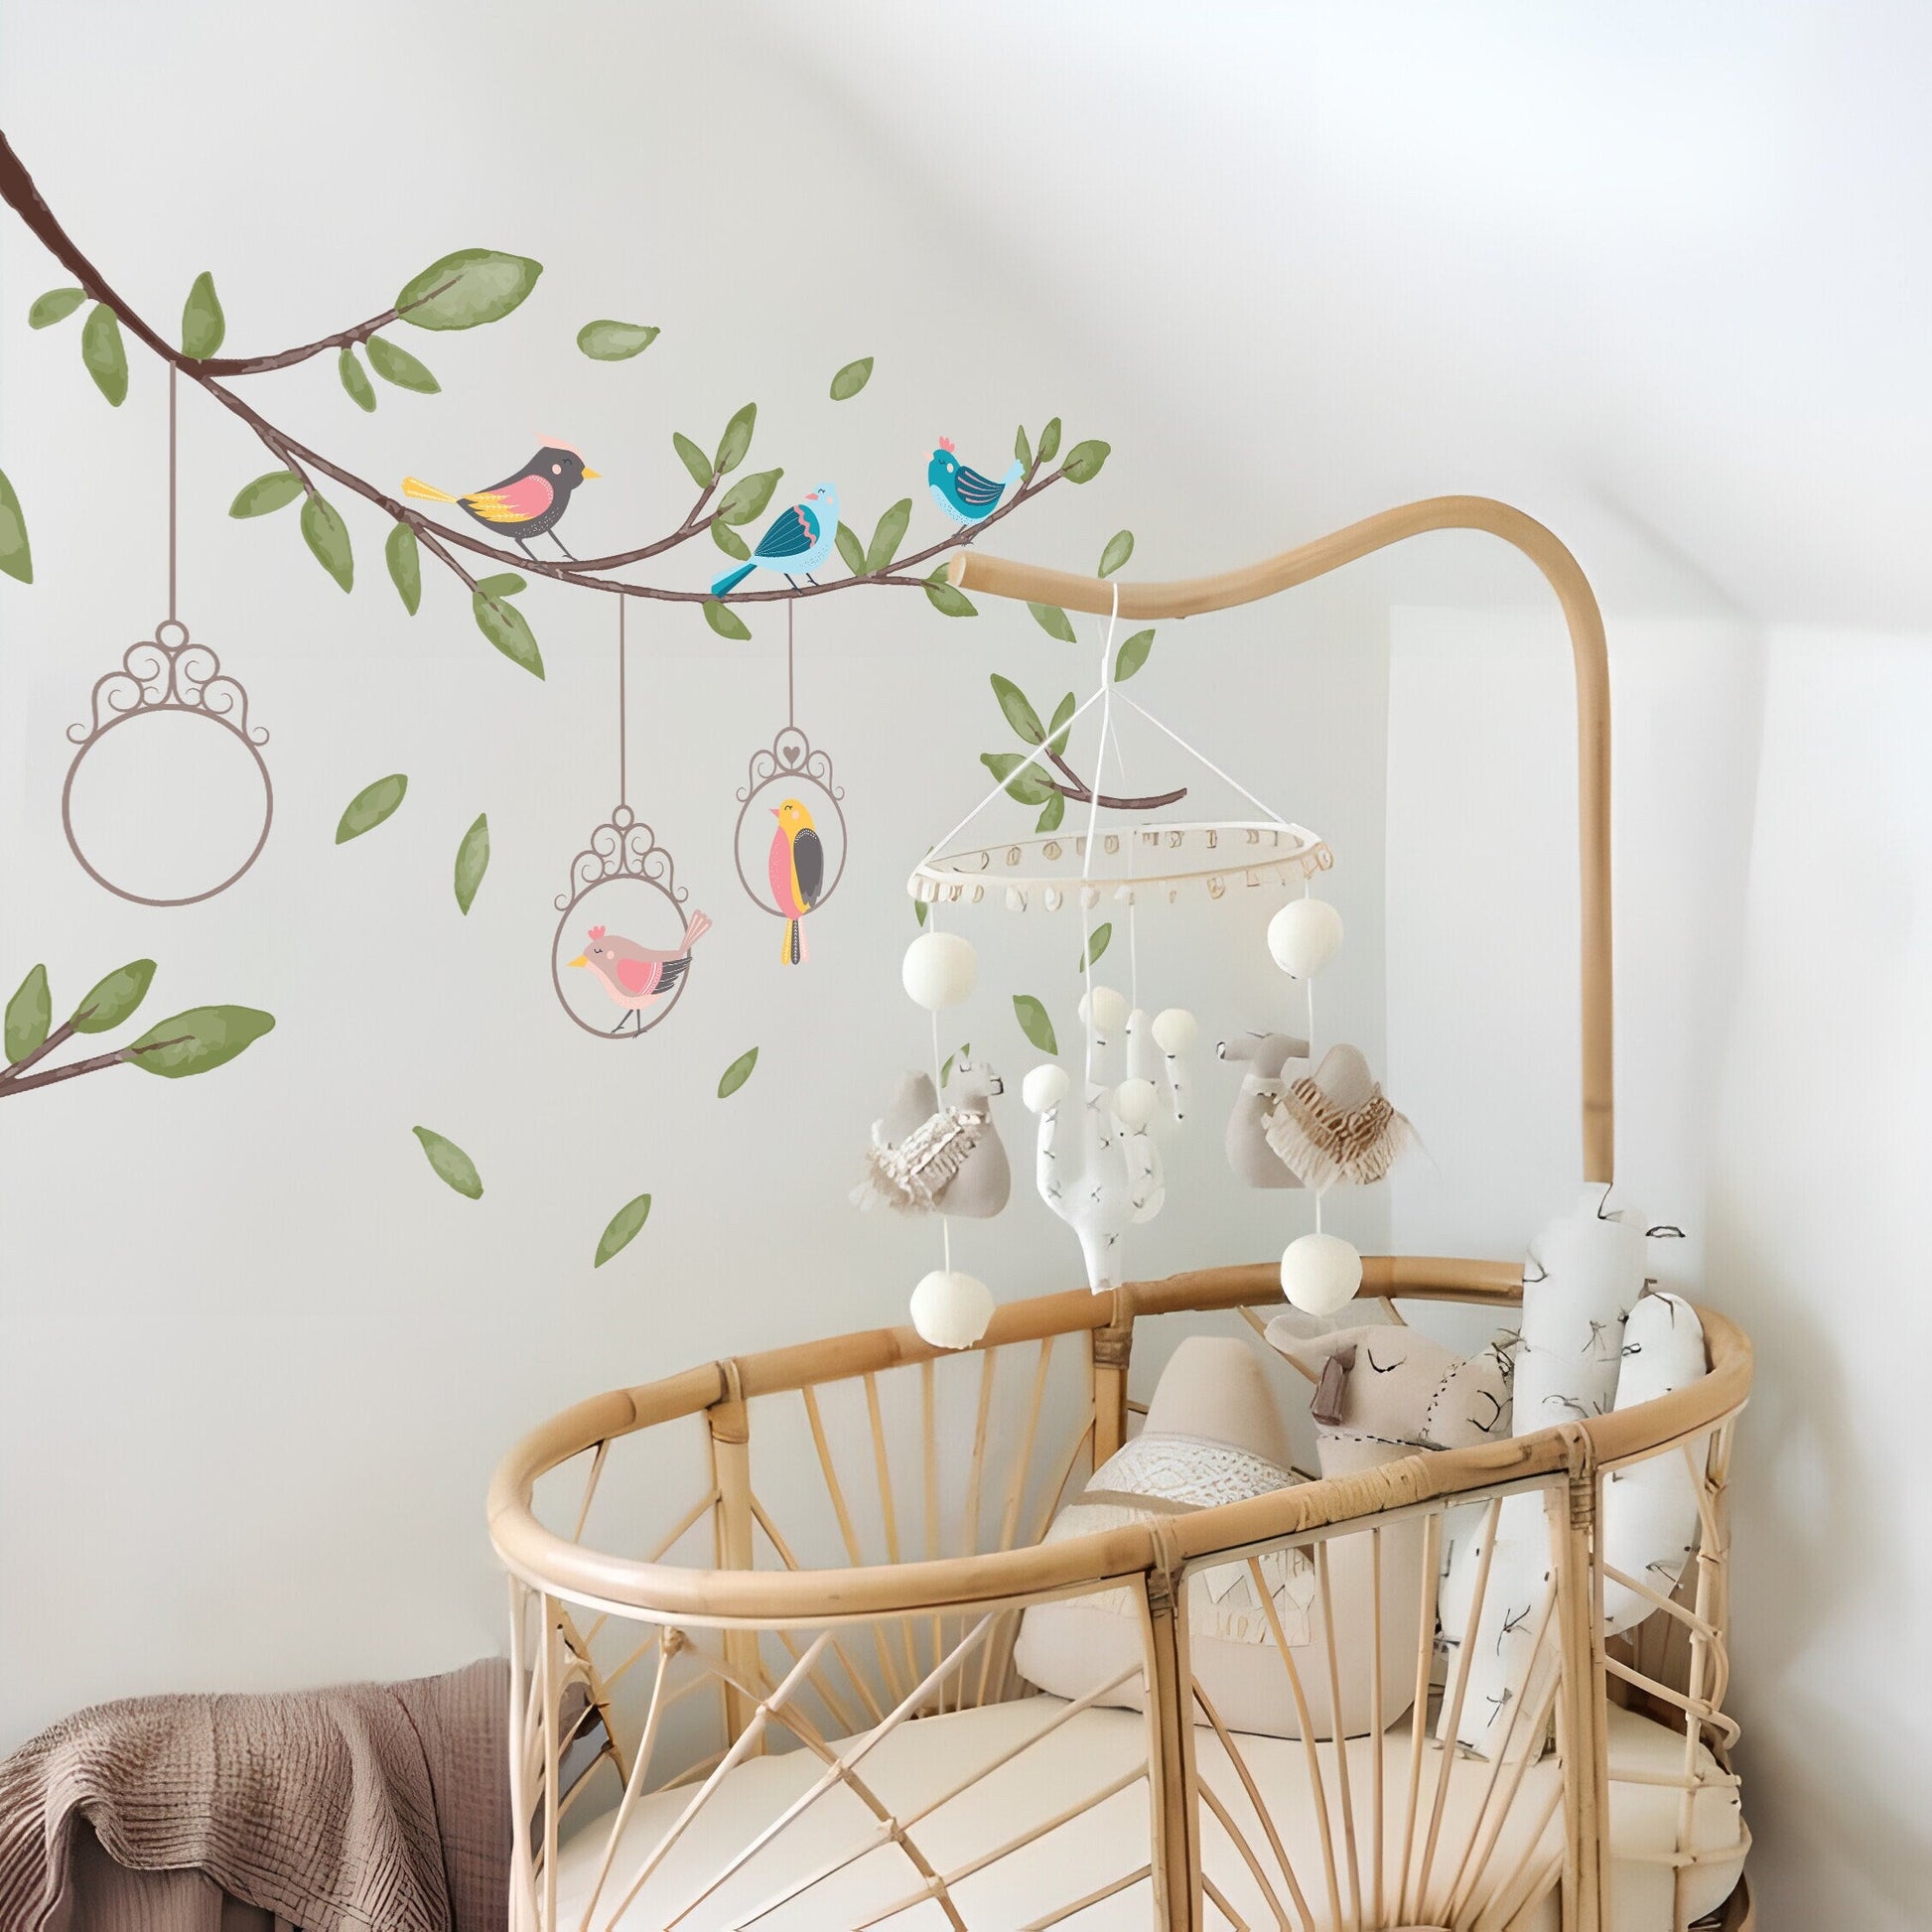 Large Tree Branch Wall Sticker Colored Birds Greenery Twig Decals Nature Boho Nursery Leaves Room Decoration, LF563